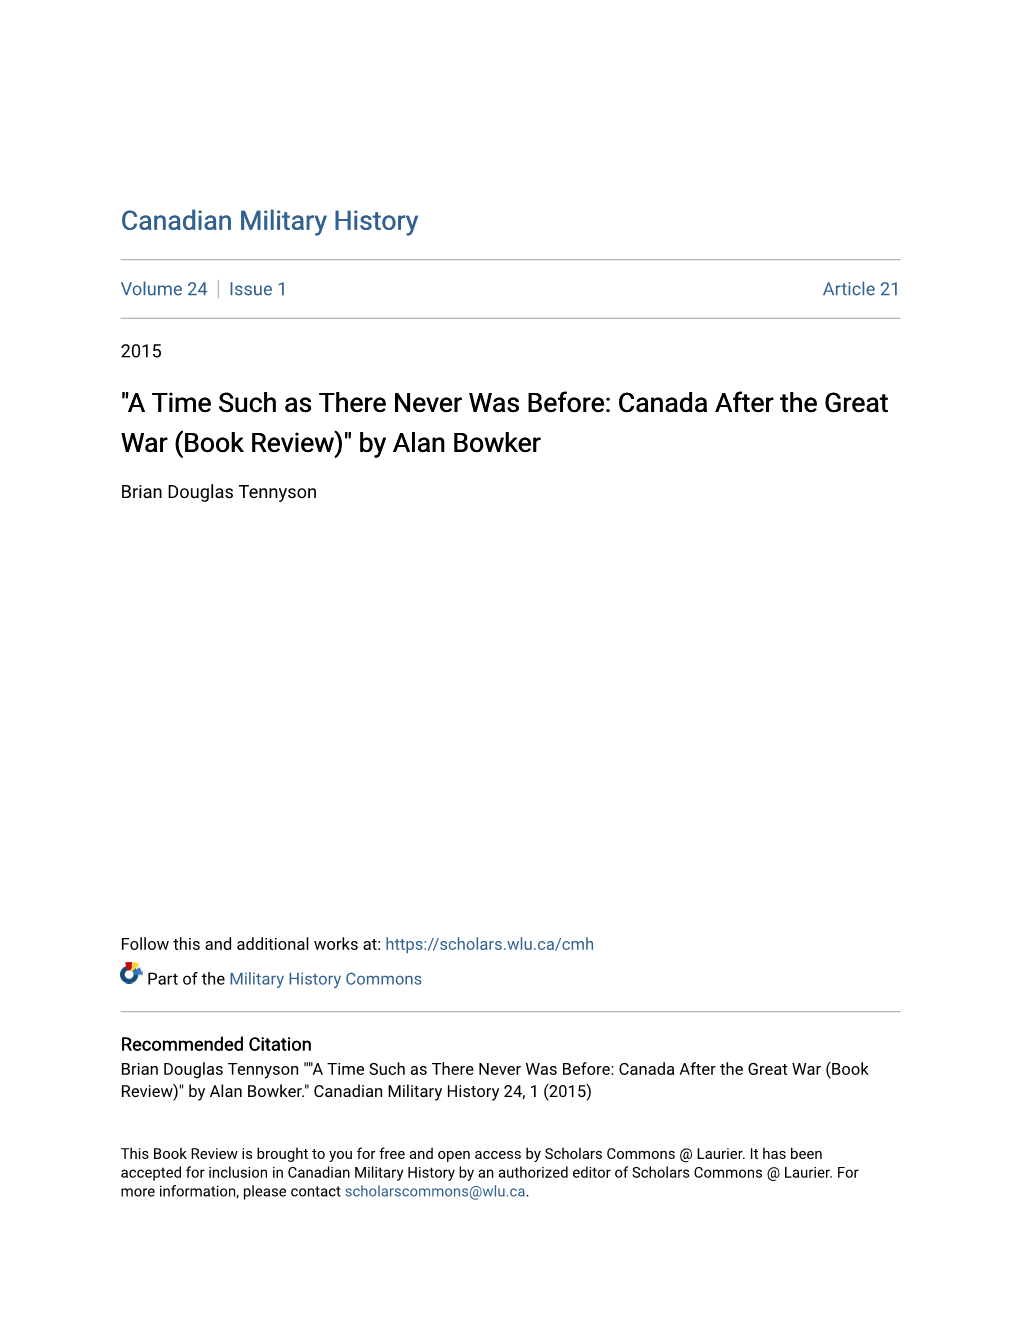 A Time Such As There Never Was Before: Canada After the Great War (Book Review)" by Alan Bowker